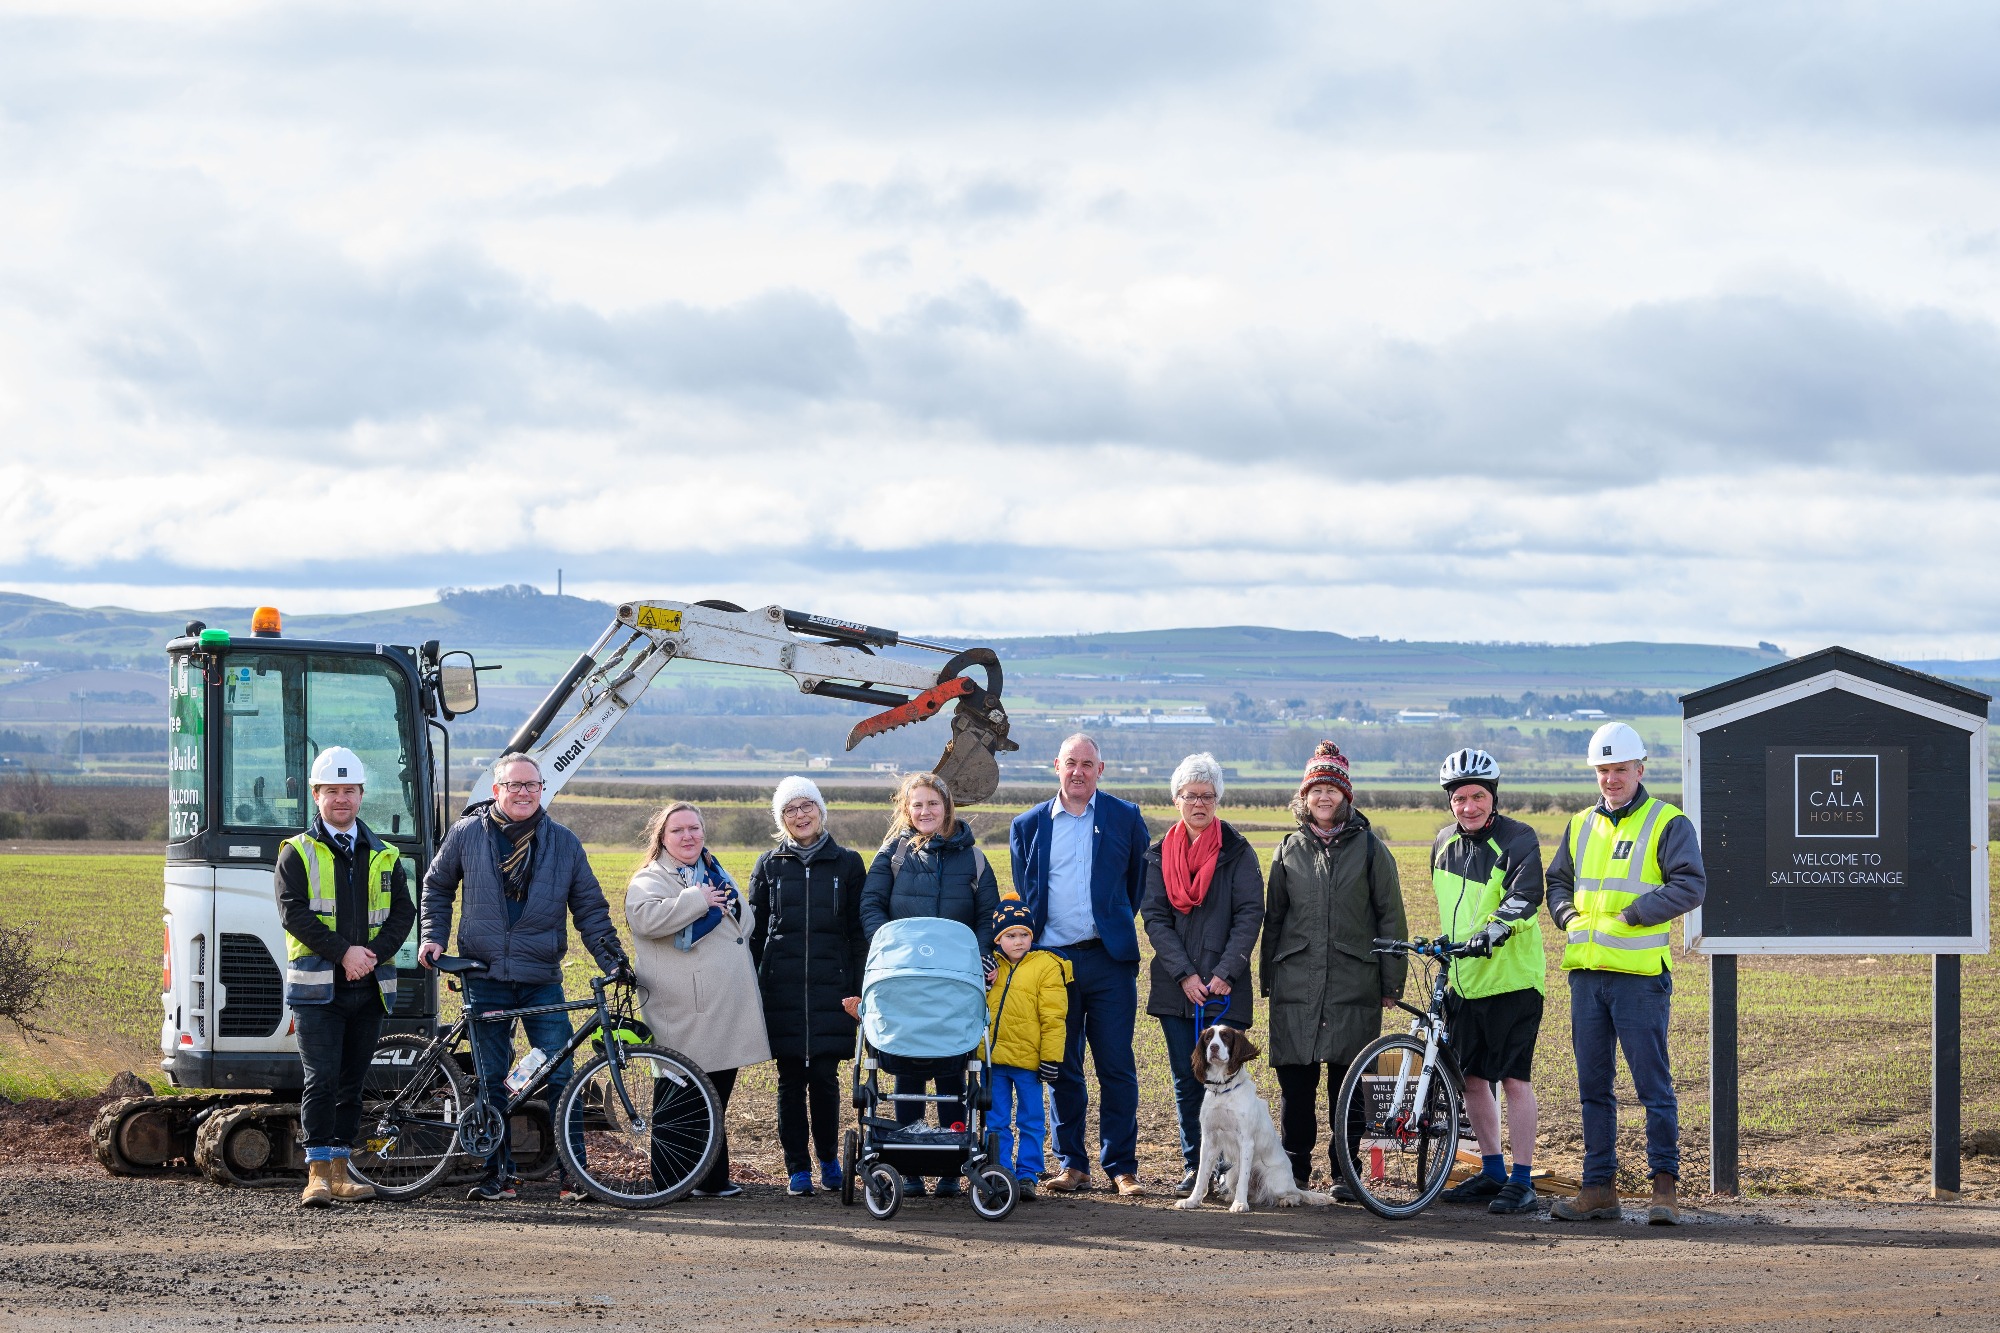 Major stretch of Gullane path completed by Cala